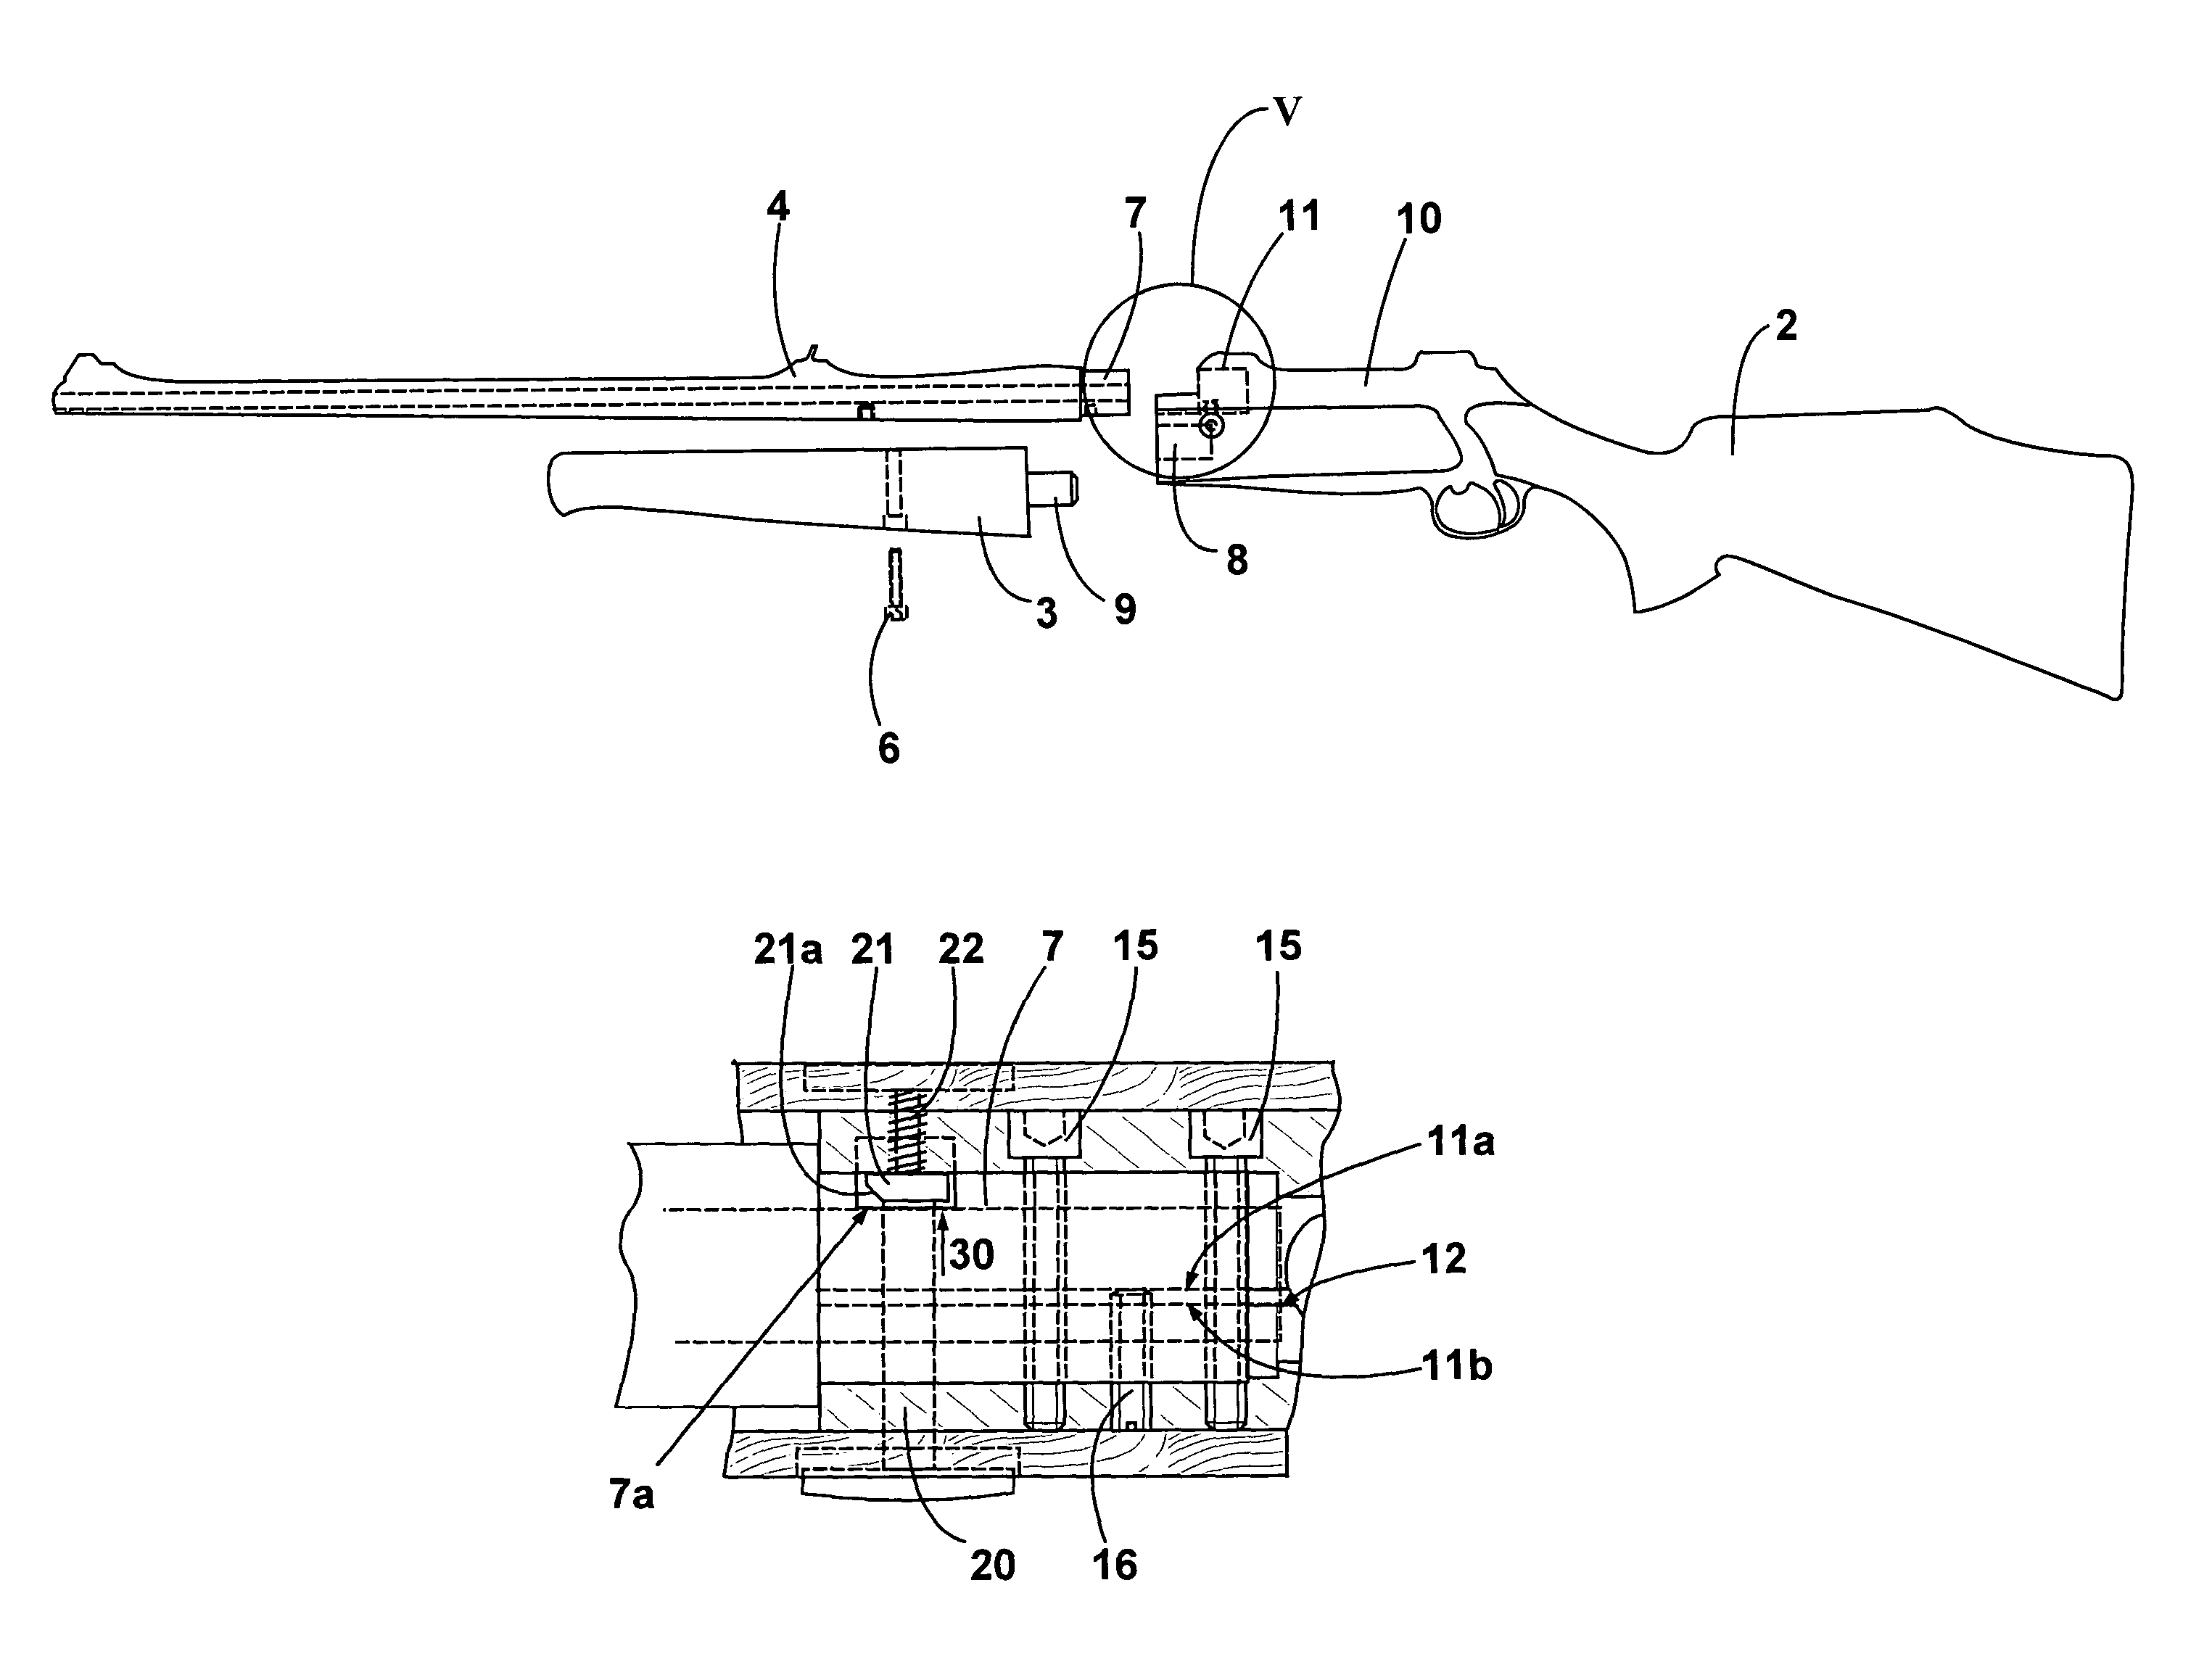 Rifle comprising a stock and a housing with a housing sheath